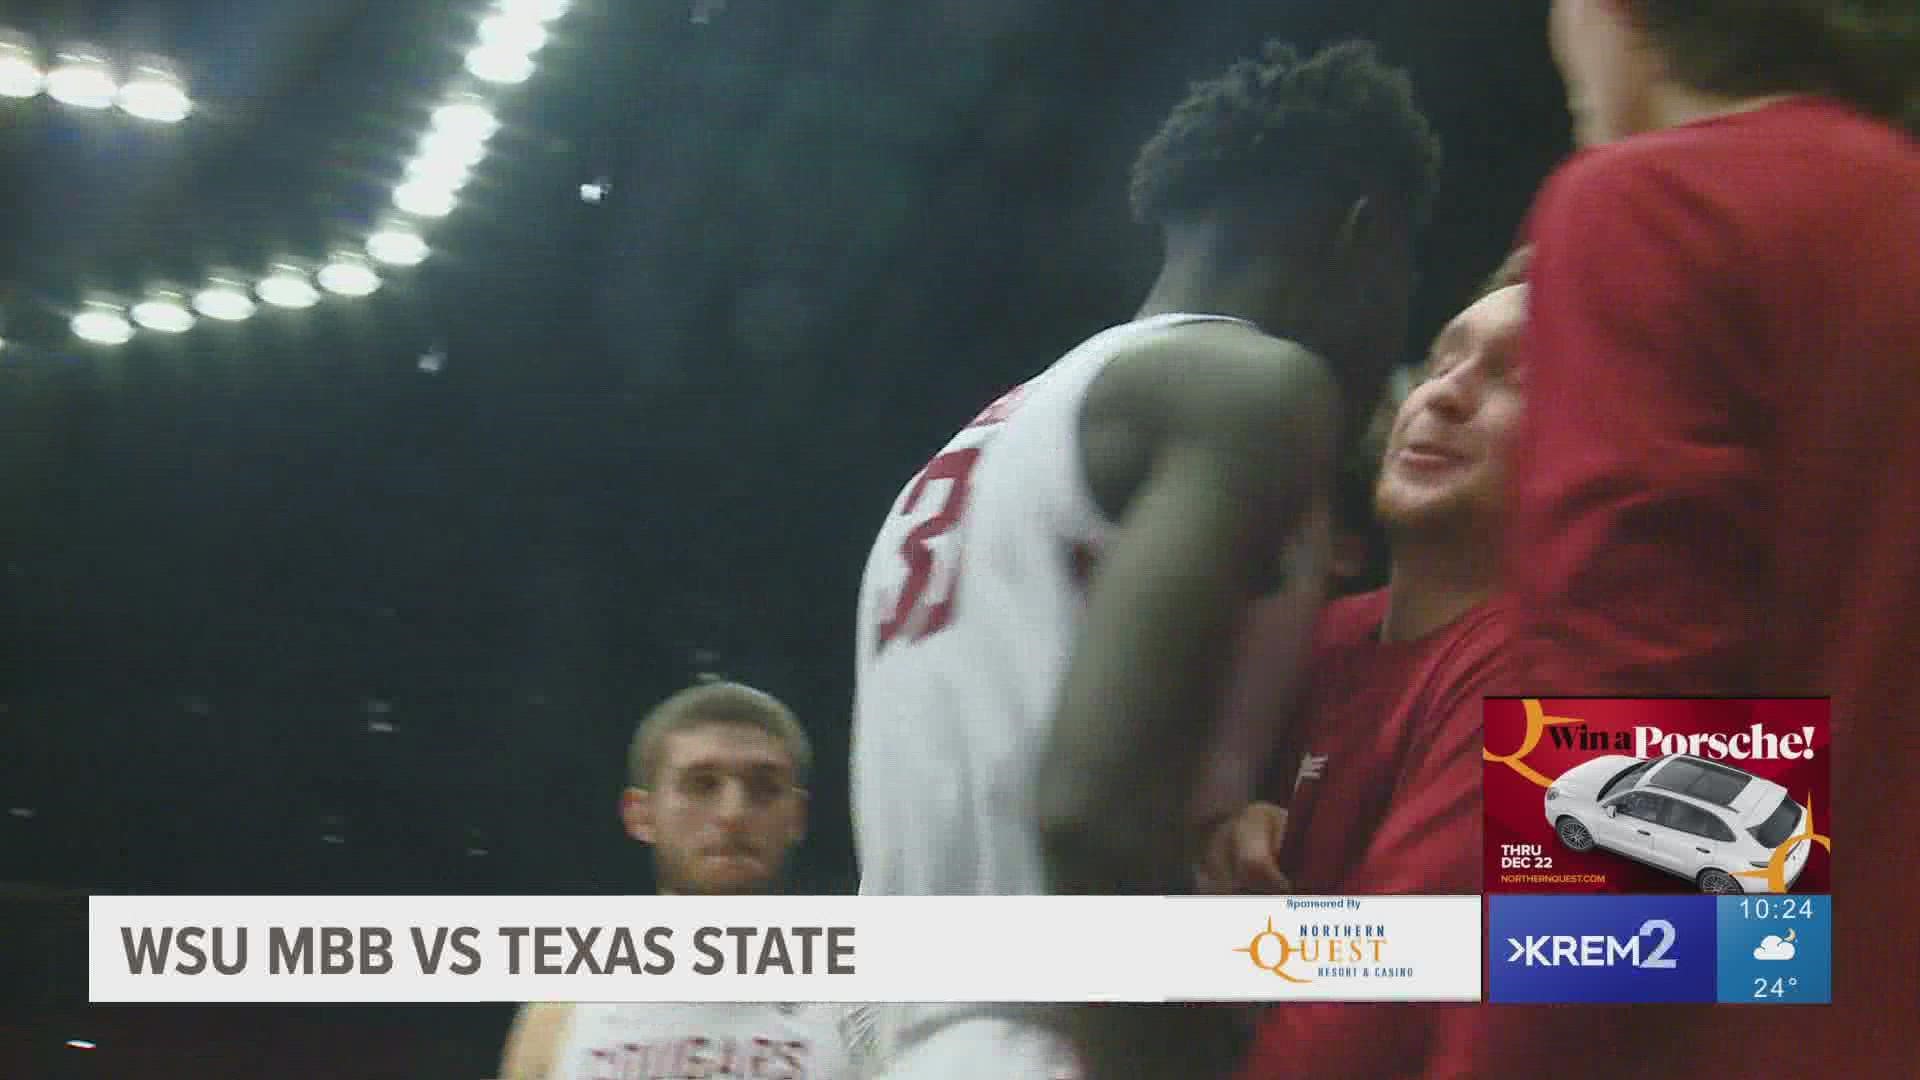 Mouhamed Gueye scored 18 points and snared a career-high 13 rebounds as Washington State opened the season with an 83-61 win over Texas State.